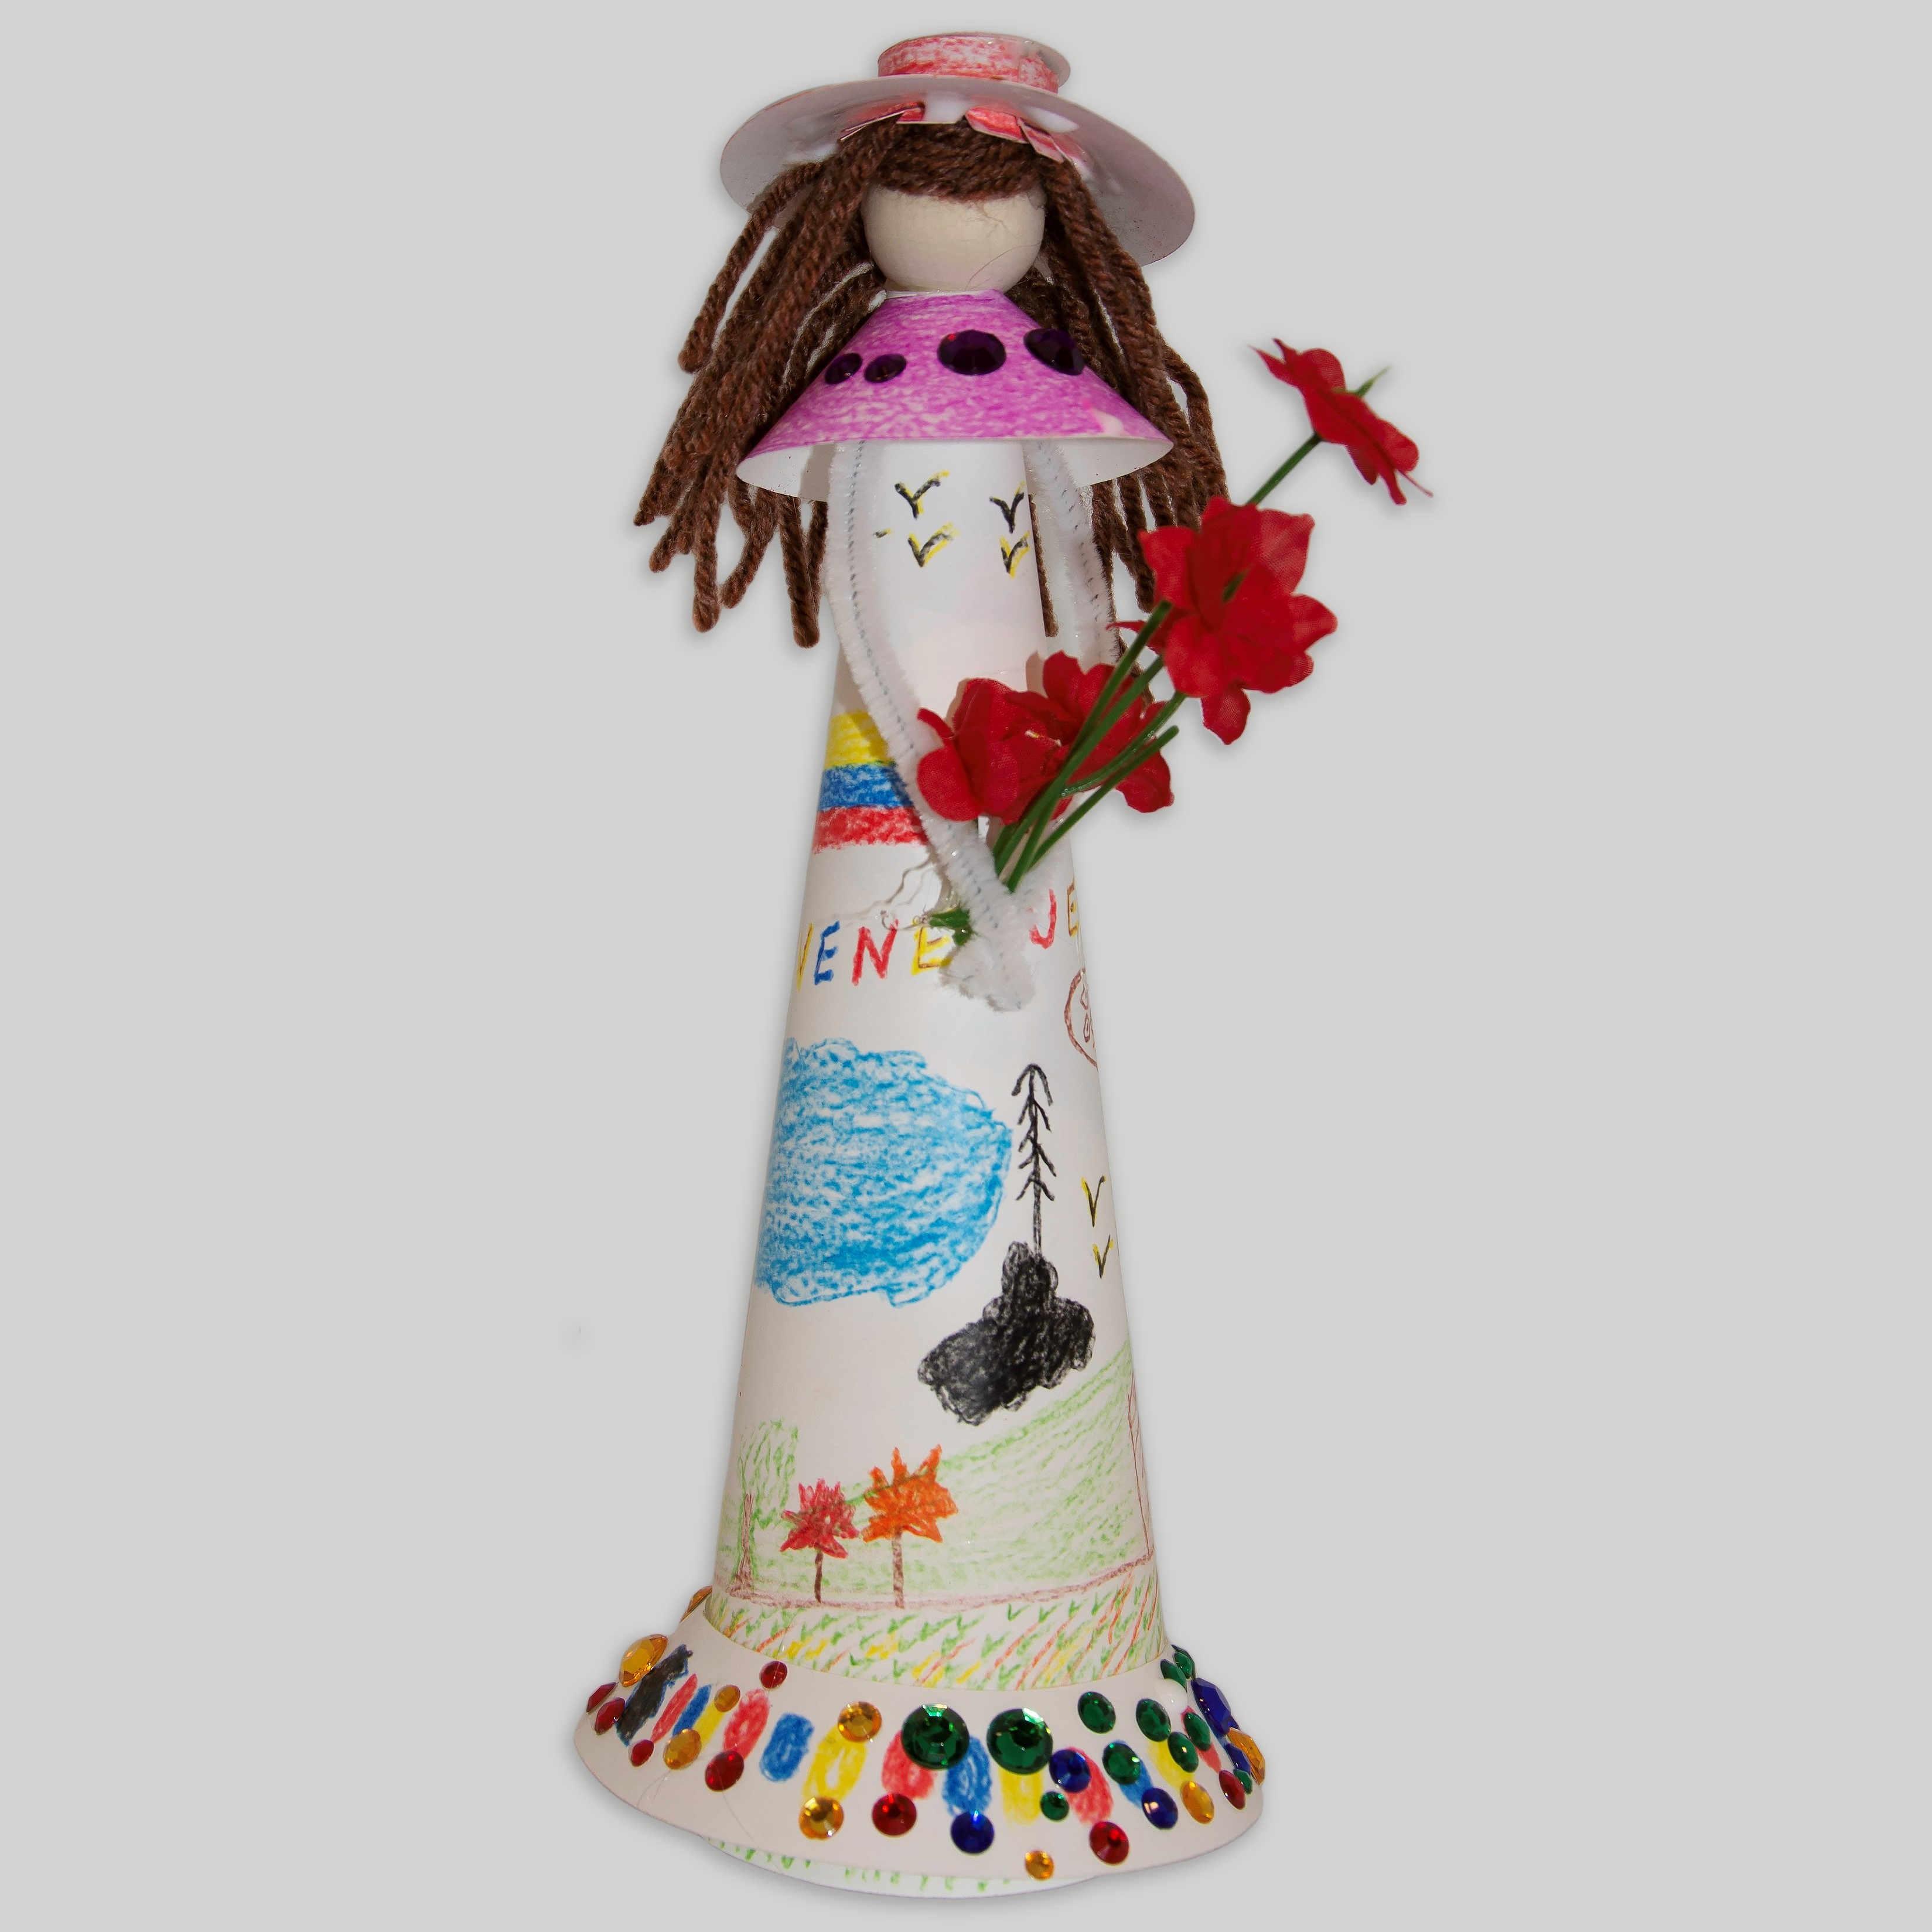 A paper faceless doll with long brown hair, colorful hat and dress, holding red flowers.